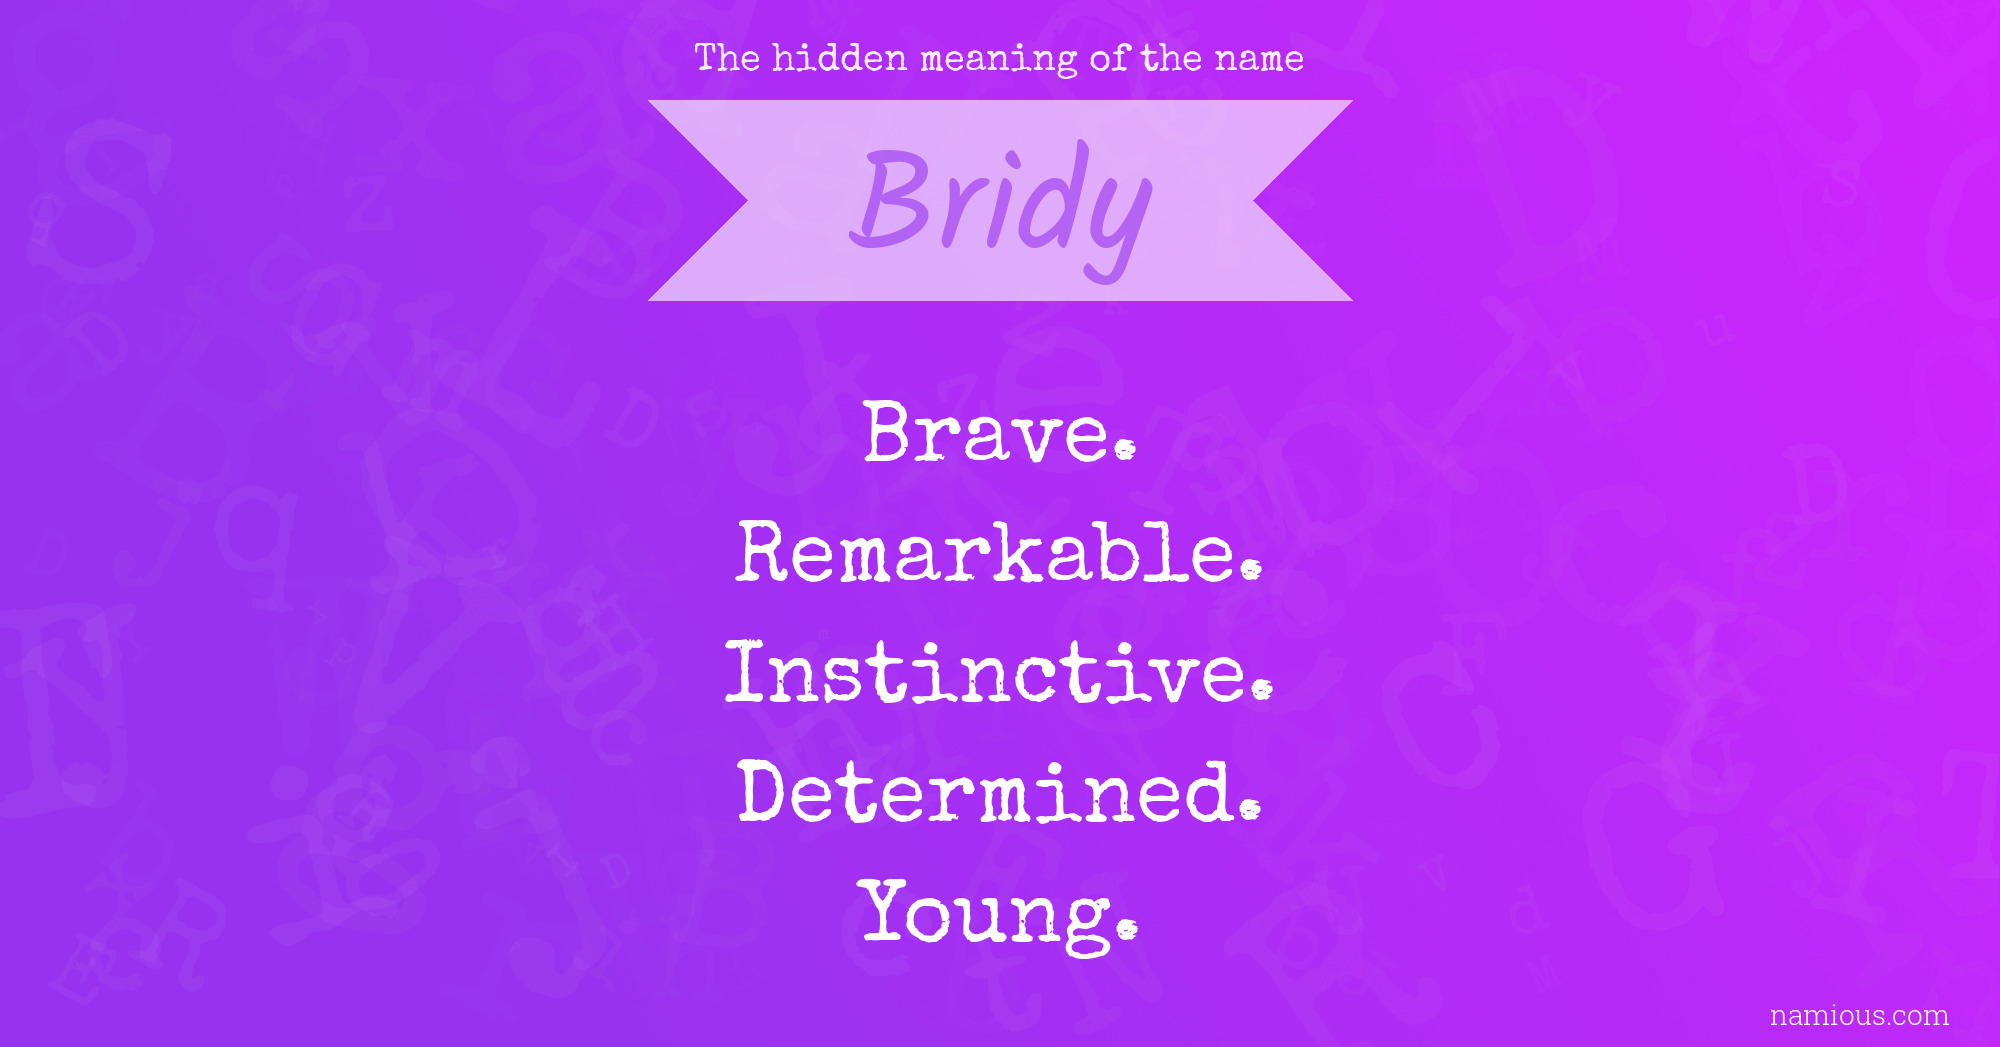 The hidden meaning of the name Bridy